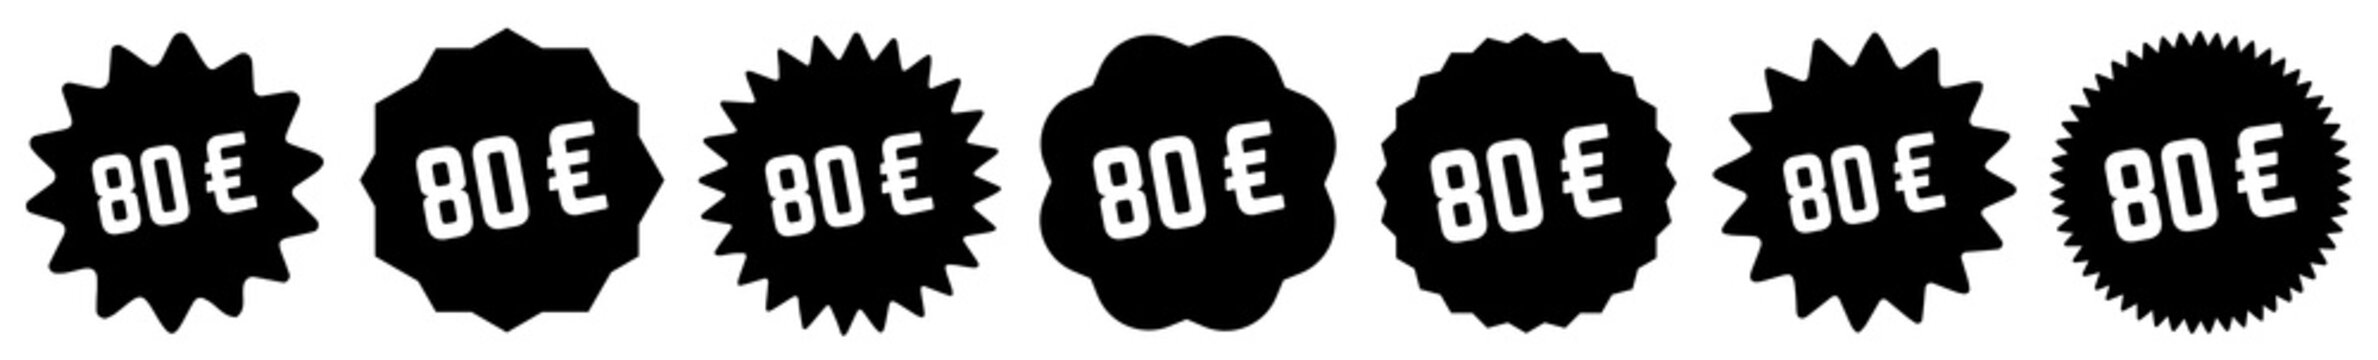 80 Price Tag Black | 80 Euro | Special Offer Icon | Sale Sticker | Deal Label | Variations